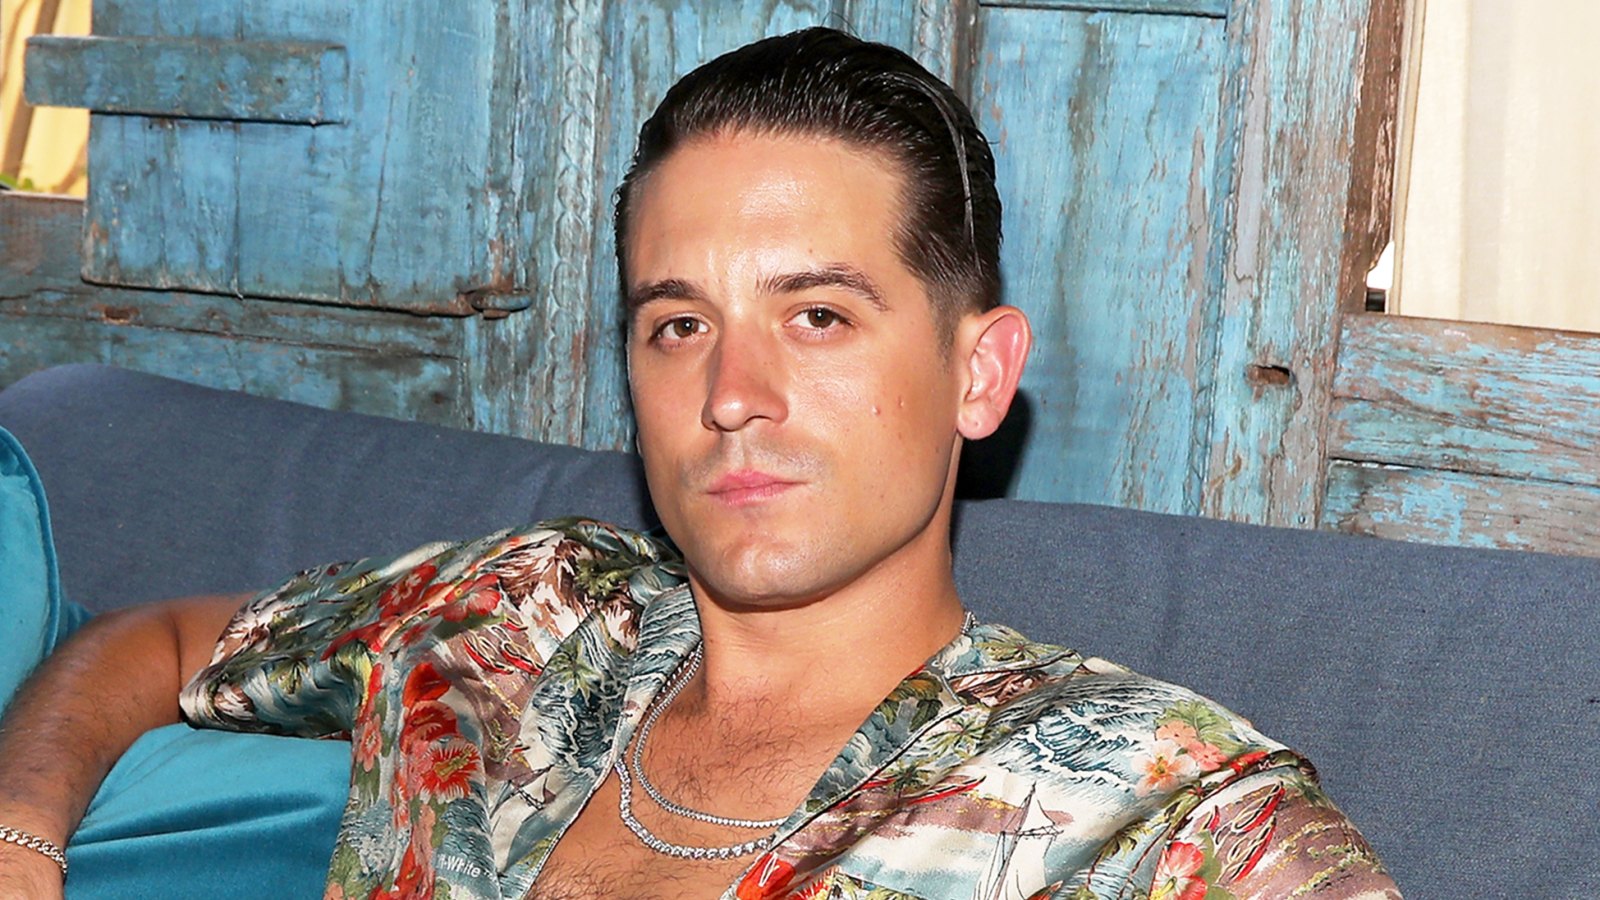 G-Eazy attends a pool party at Playboy Social Club in Palm Springs, California, on April 14, 2018.